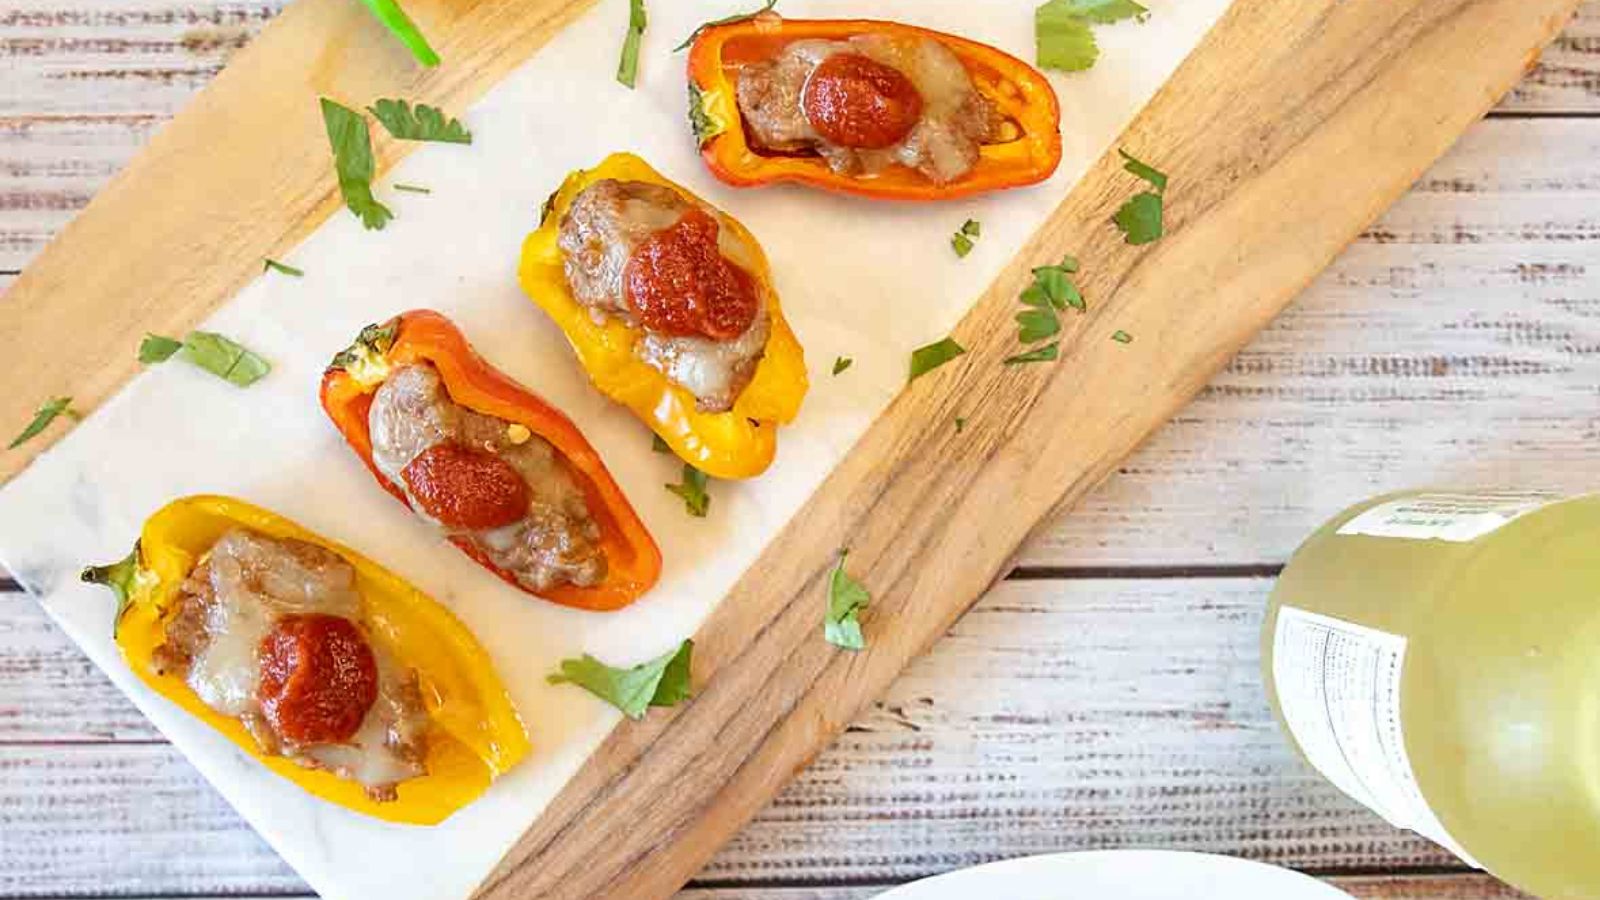 Italian Sausage Stuffed Mini Peppers with mozzarella and pizza sauce on the board.